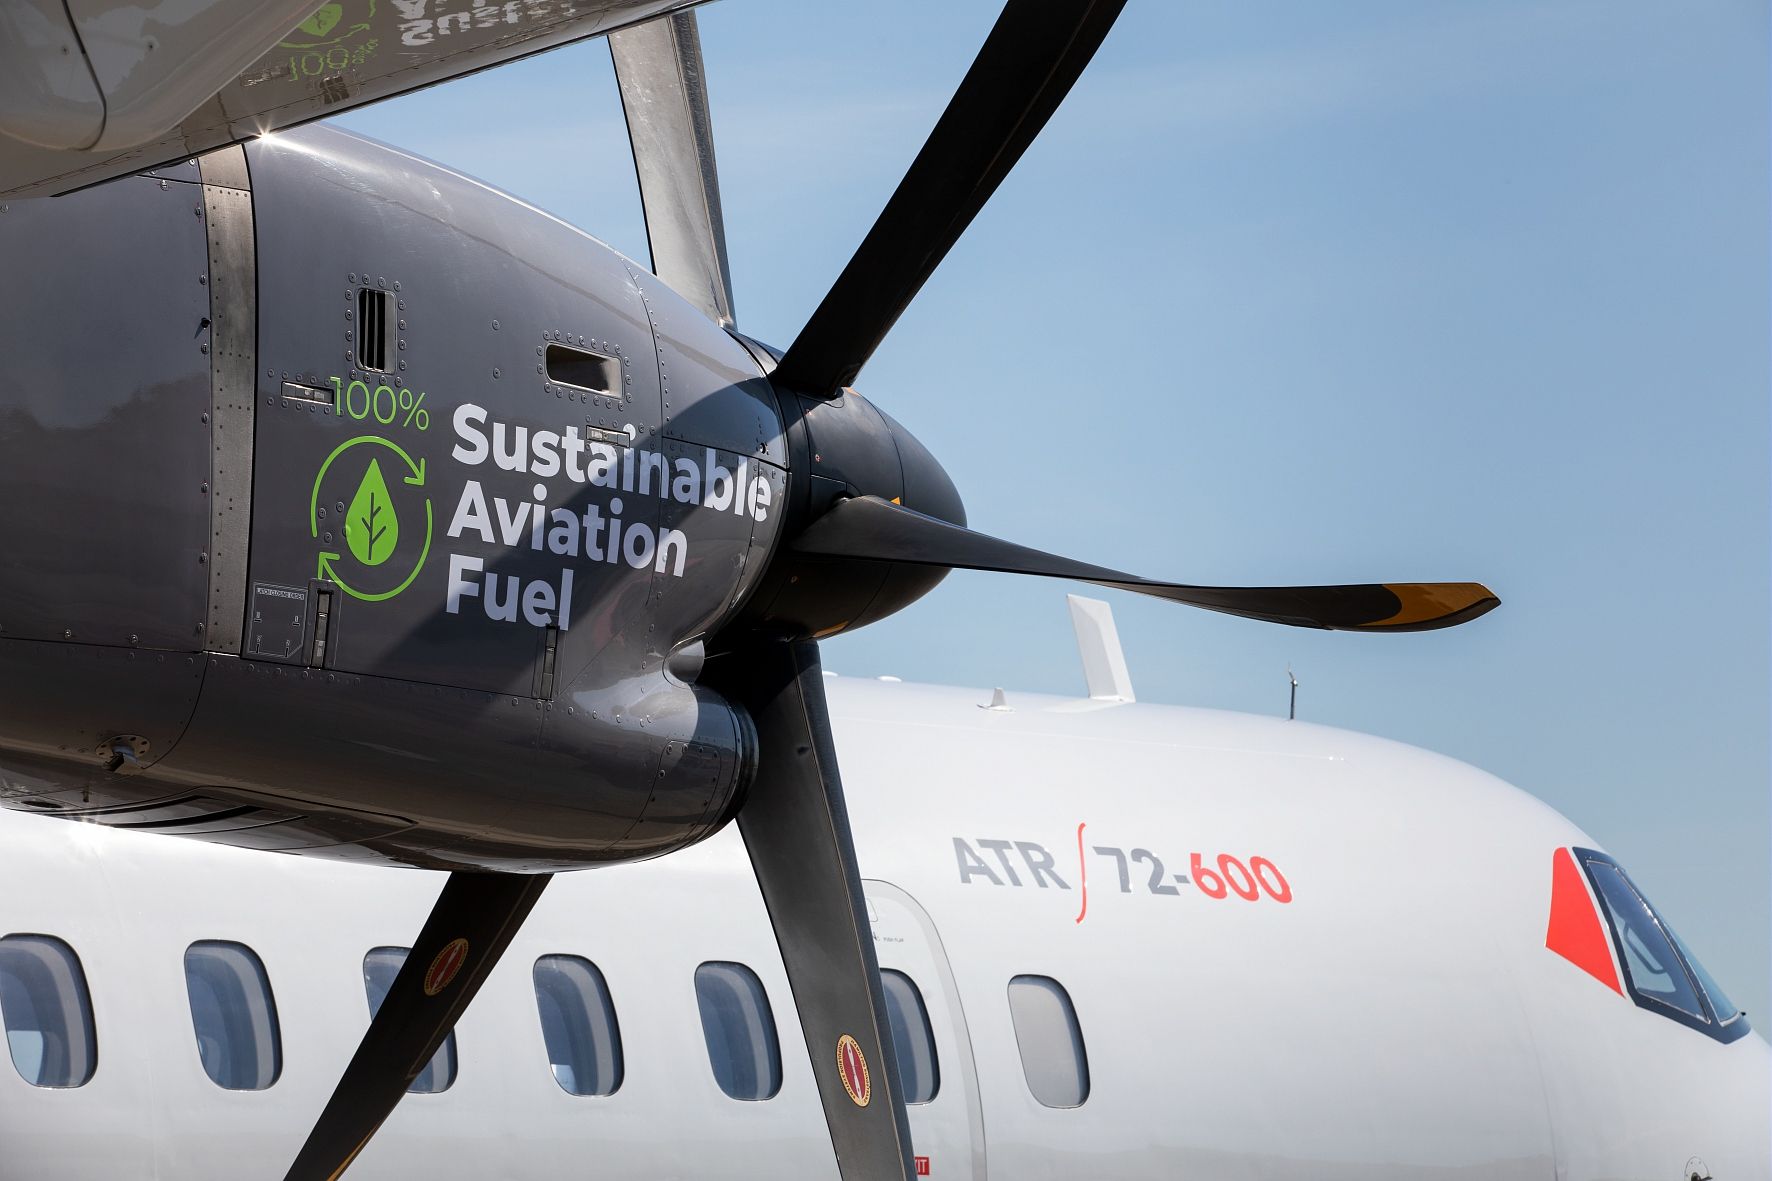 A closeup of the engine of an ATR aircraft with a 100% sustainable aviation fuel logo painted.